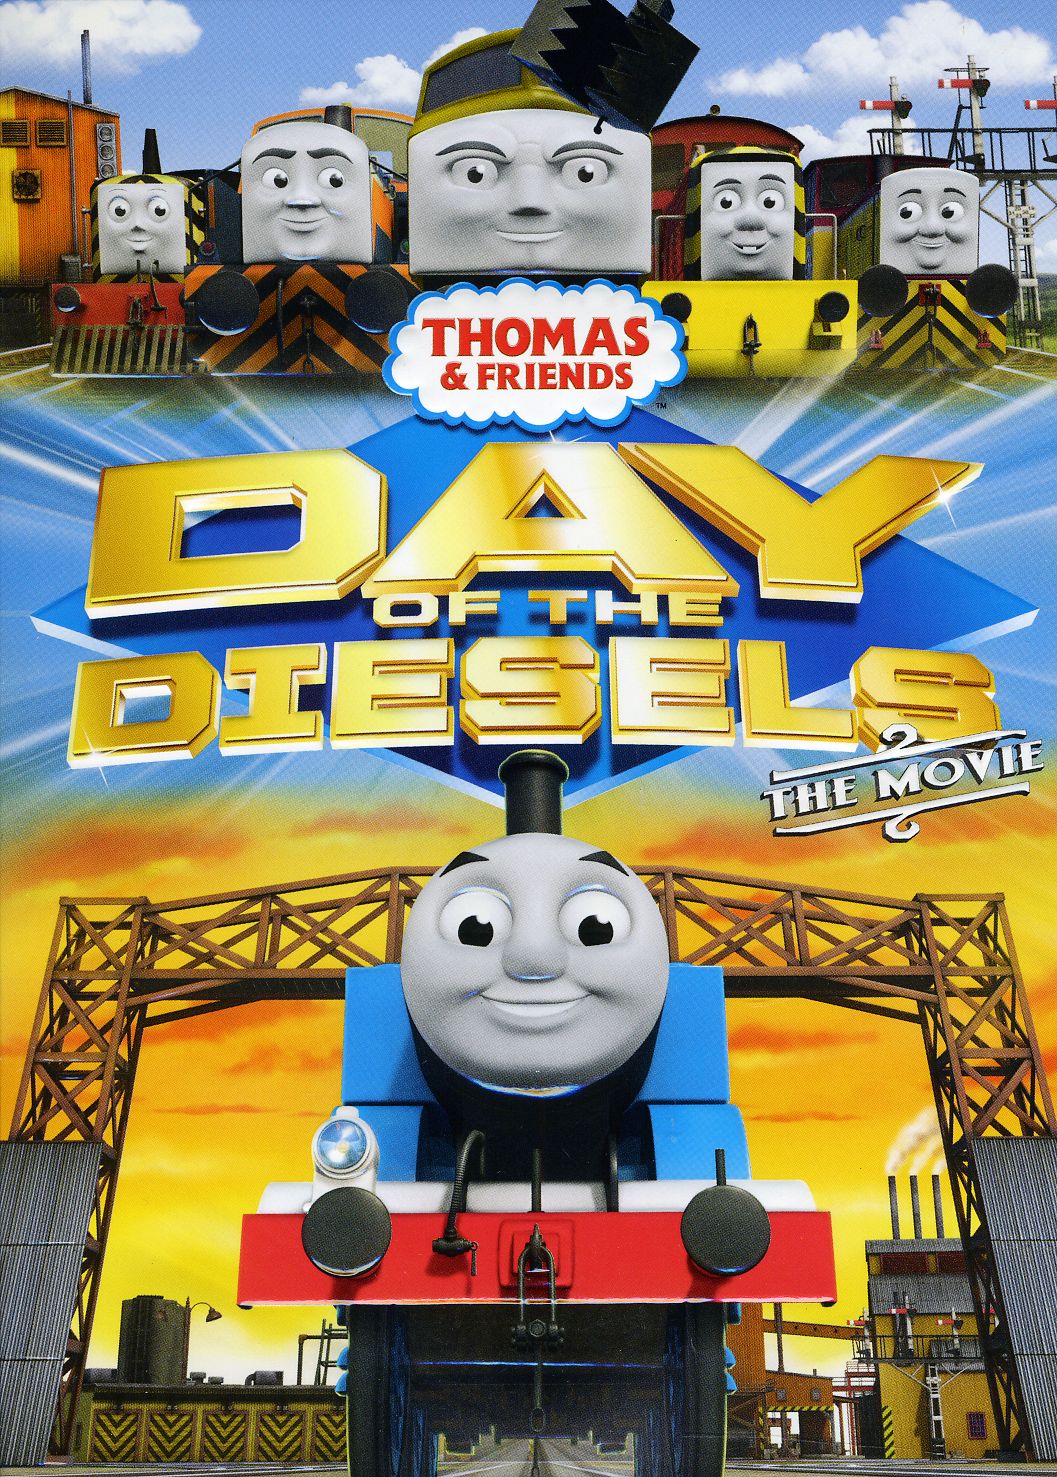 THOMAS & FRIENDS: DAY OF THE DIESELS MOVIE / (AC3)